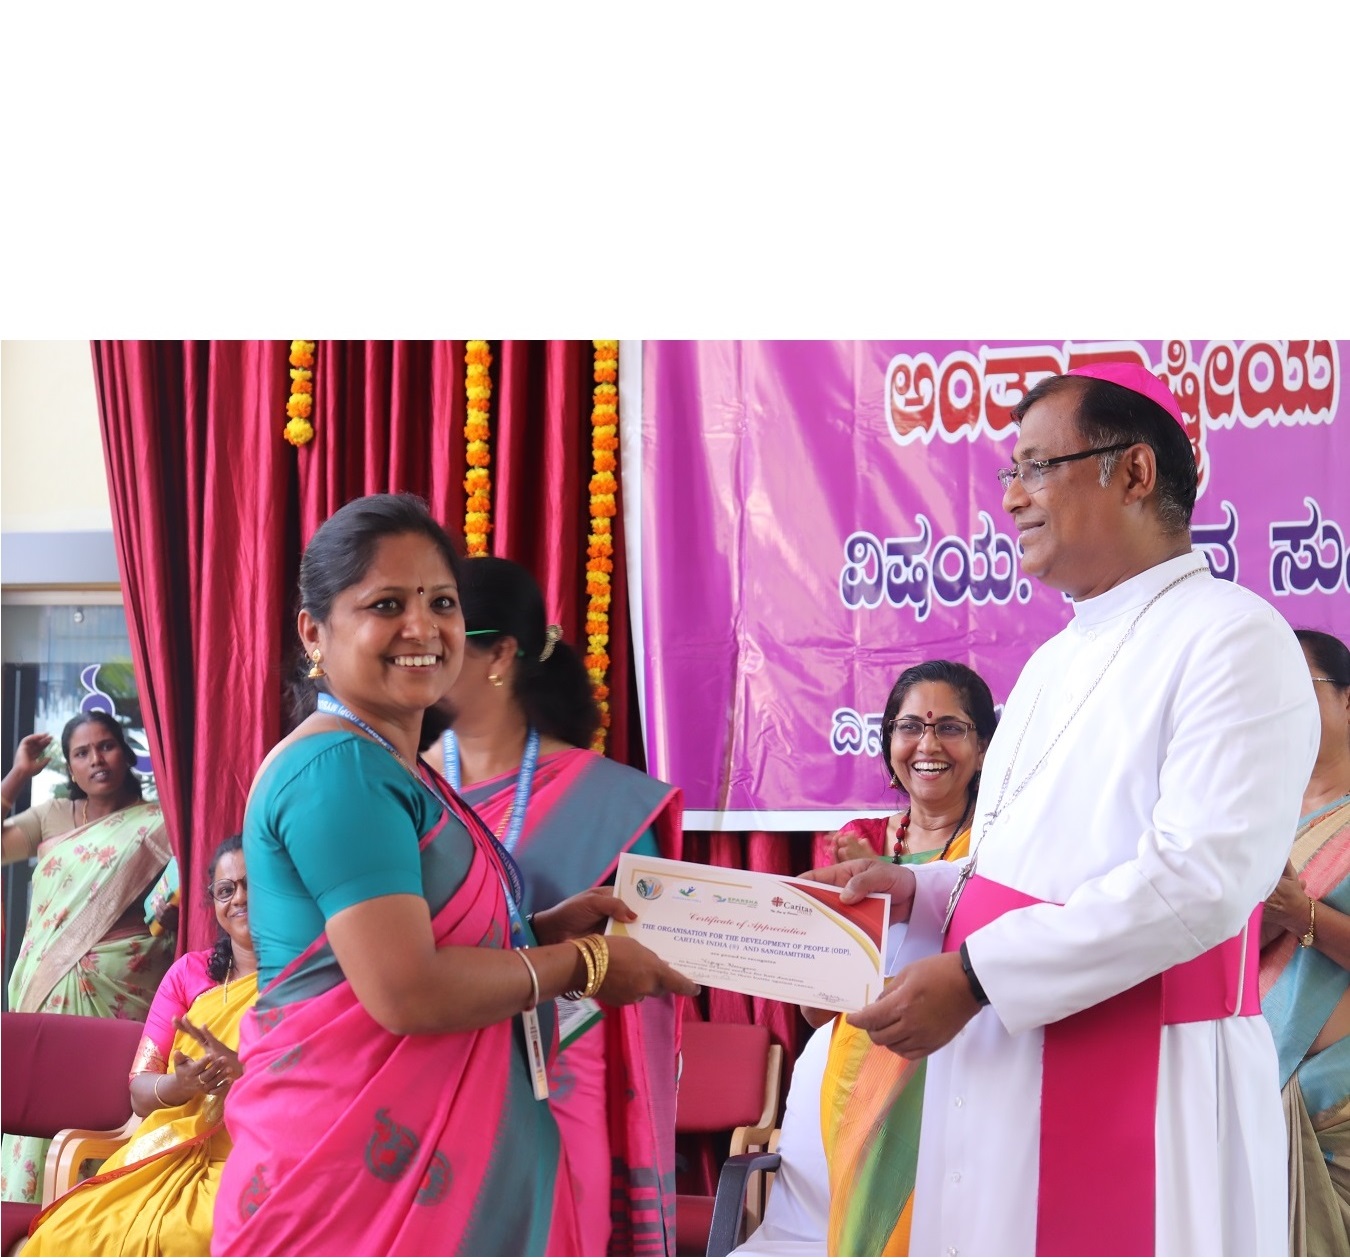 Distribution of certificates to members who donated hair for the cancer patients